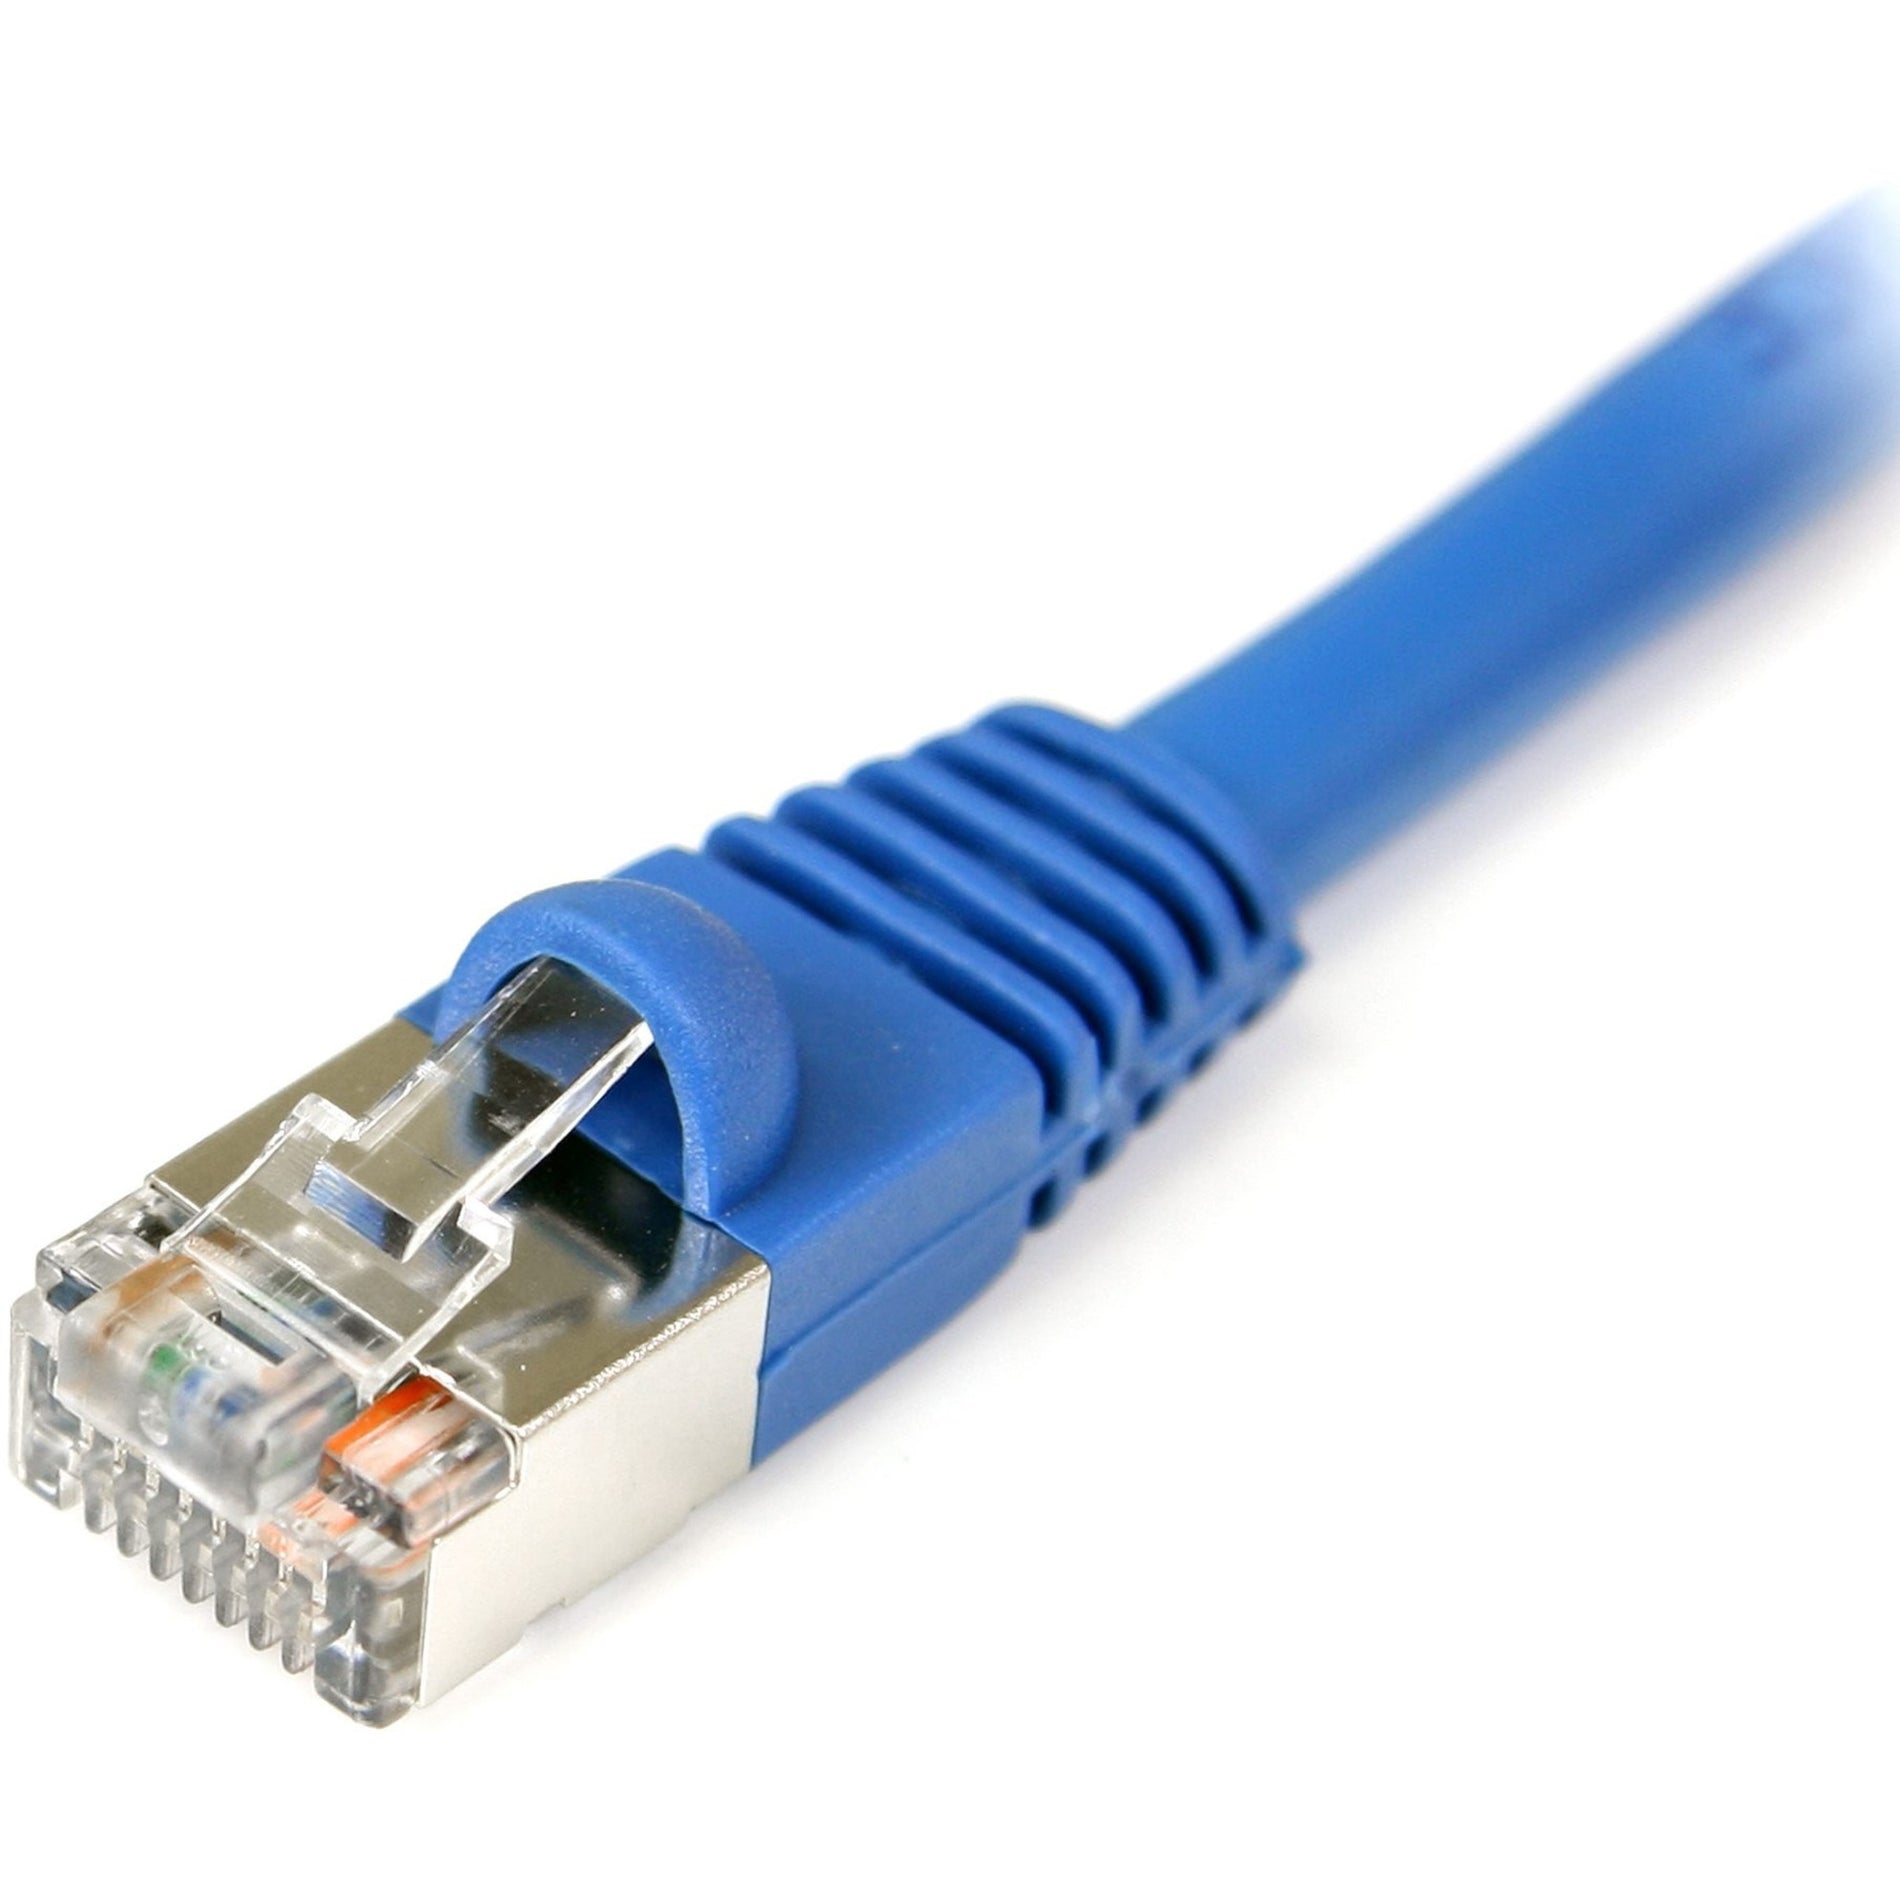 StarTech.com S45PATCH6BL 6 ft Blue Snagless Shielded Cat5e Patch Cable, Strain Relief, Molded, Rugged, EMI/RF Protection